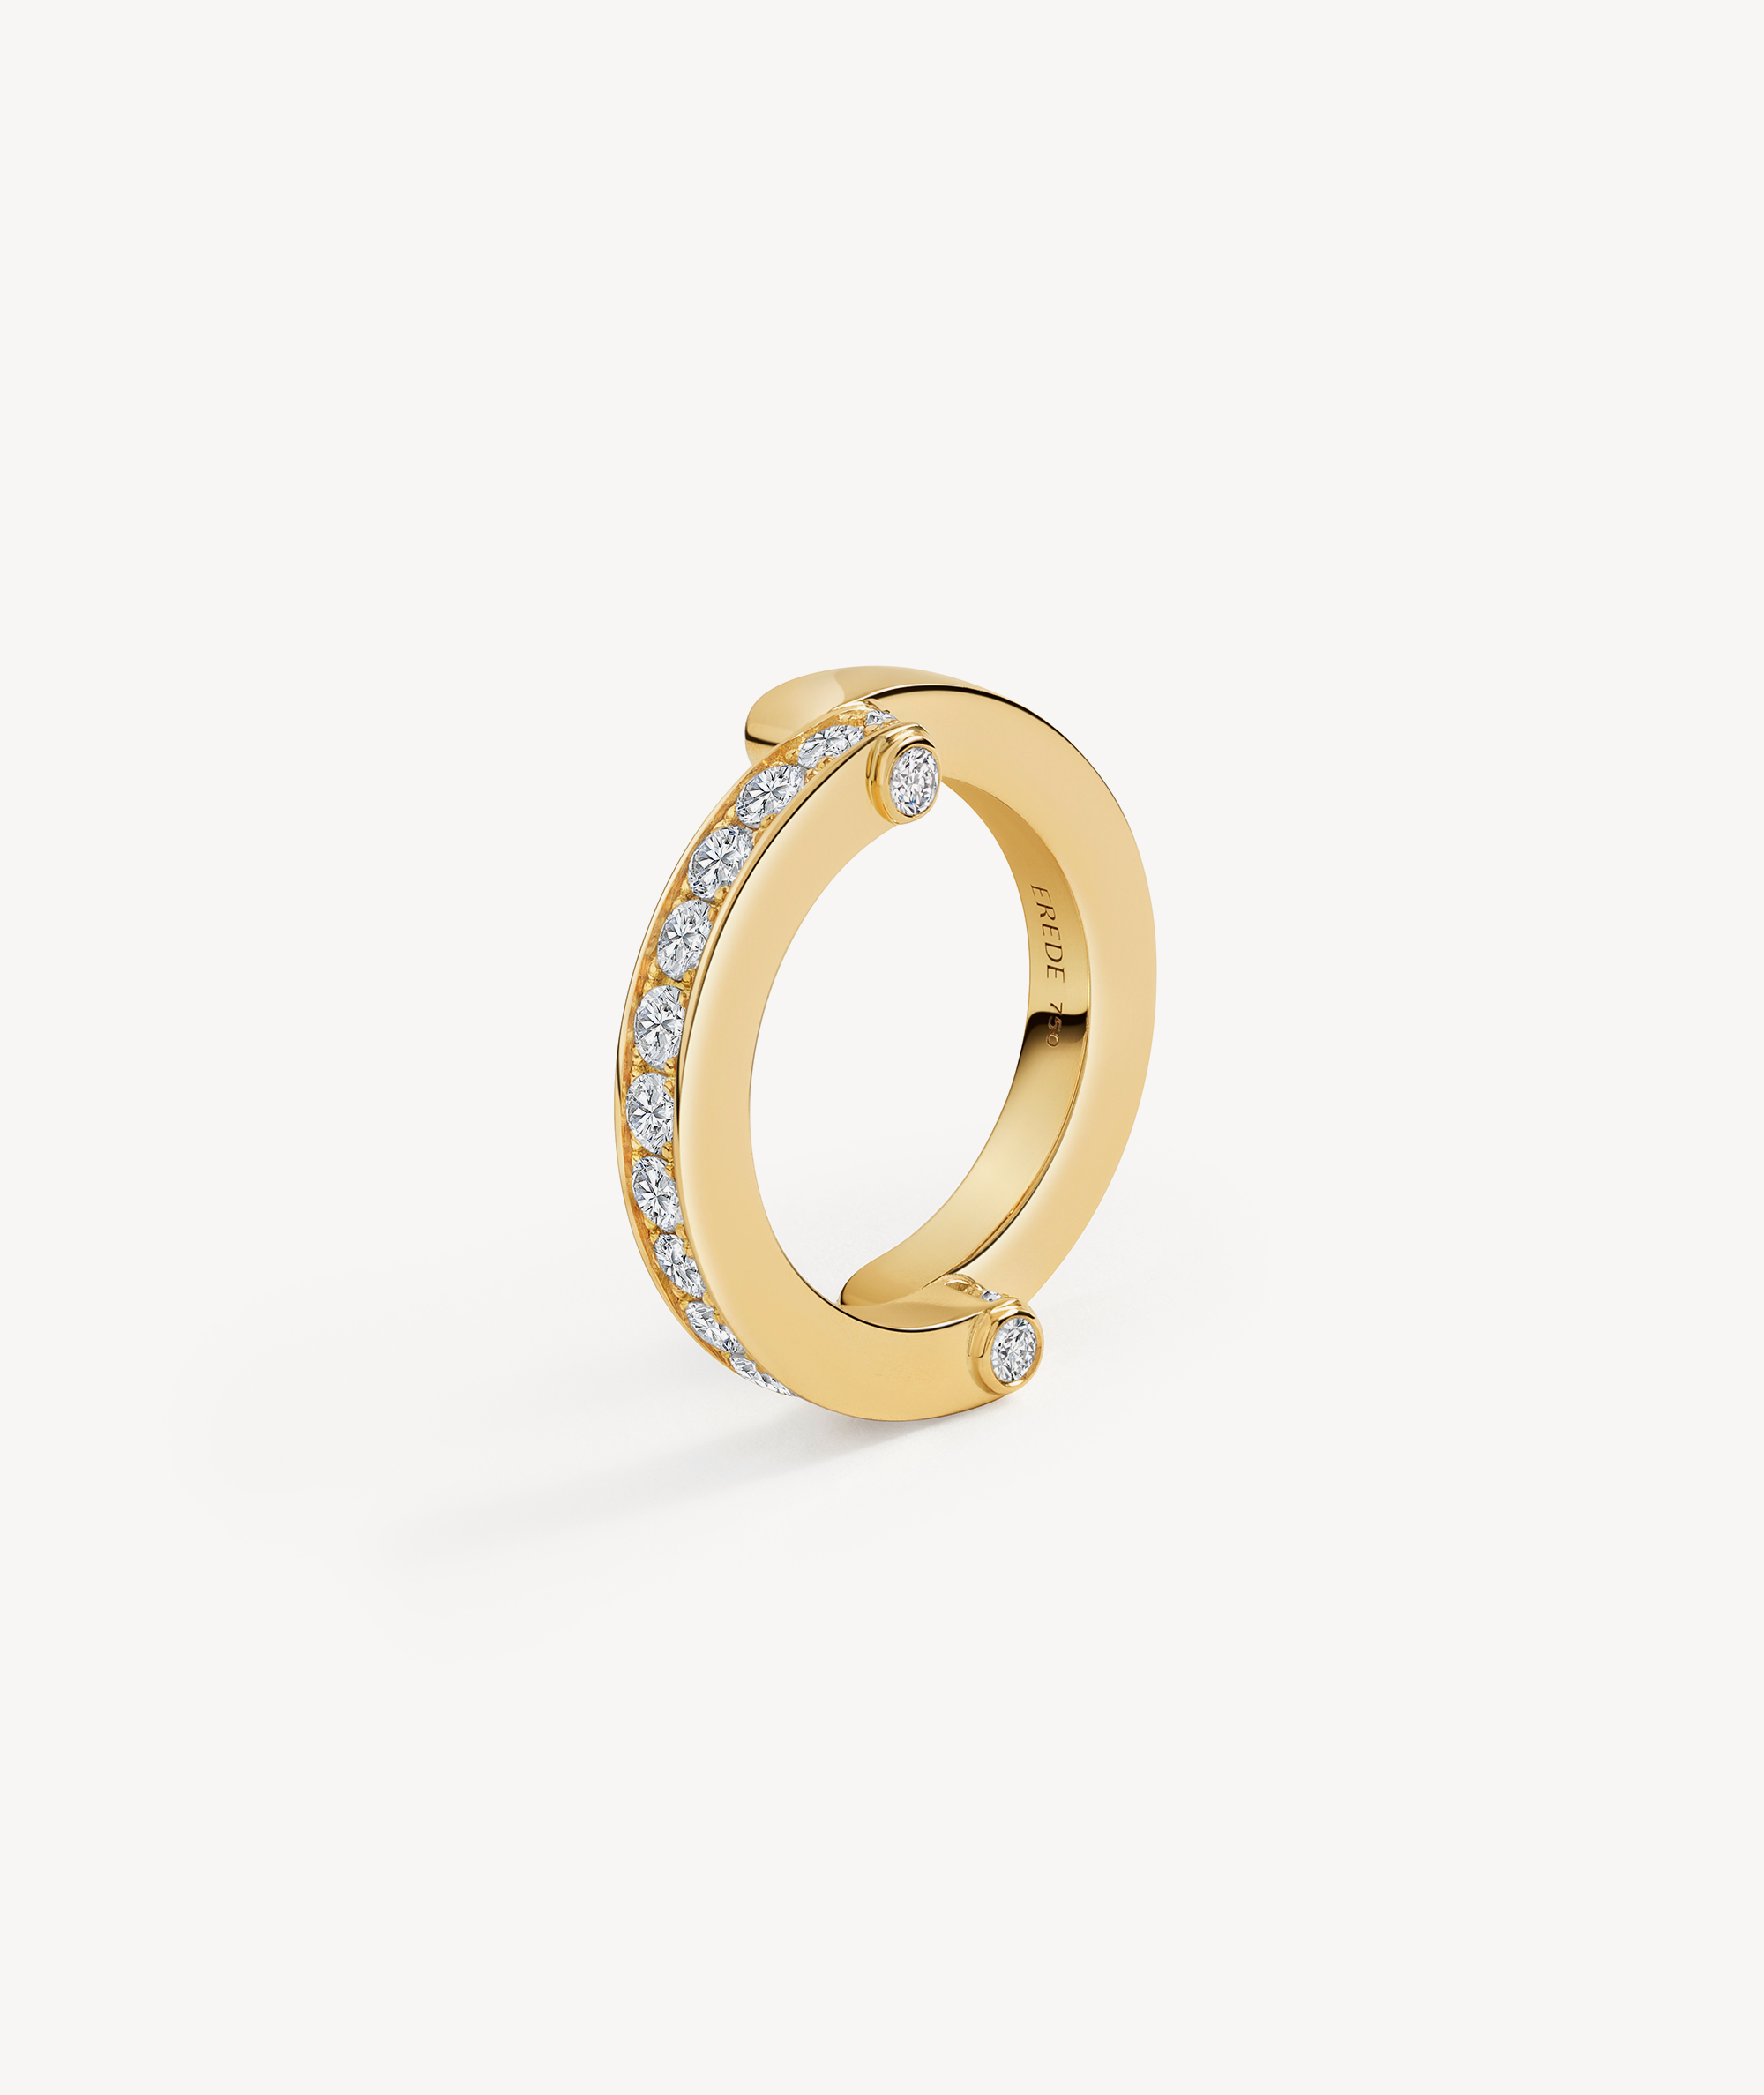 EREDE ring in 18k recycled yellow gold and lab-grown diamonds.